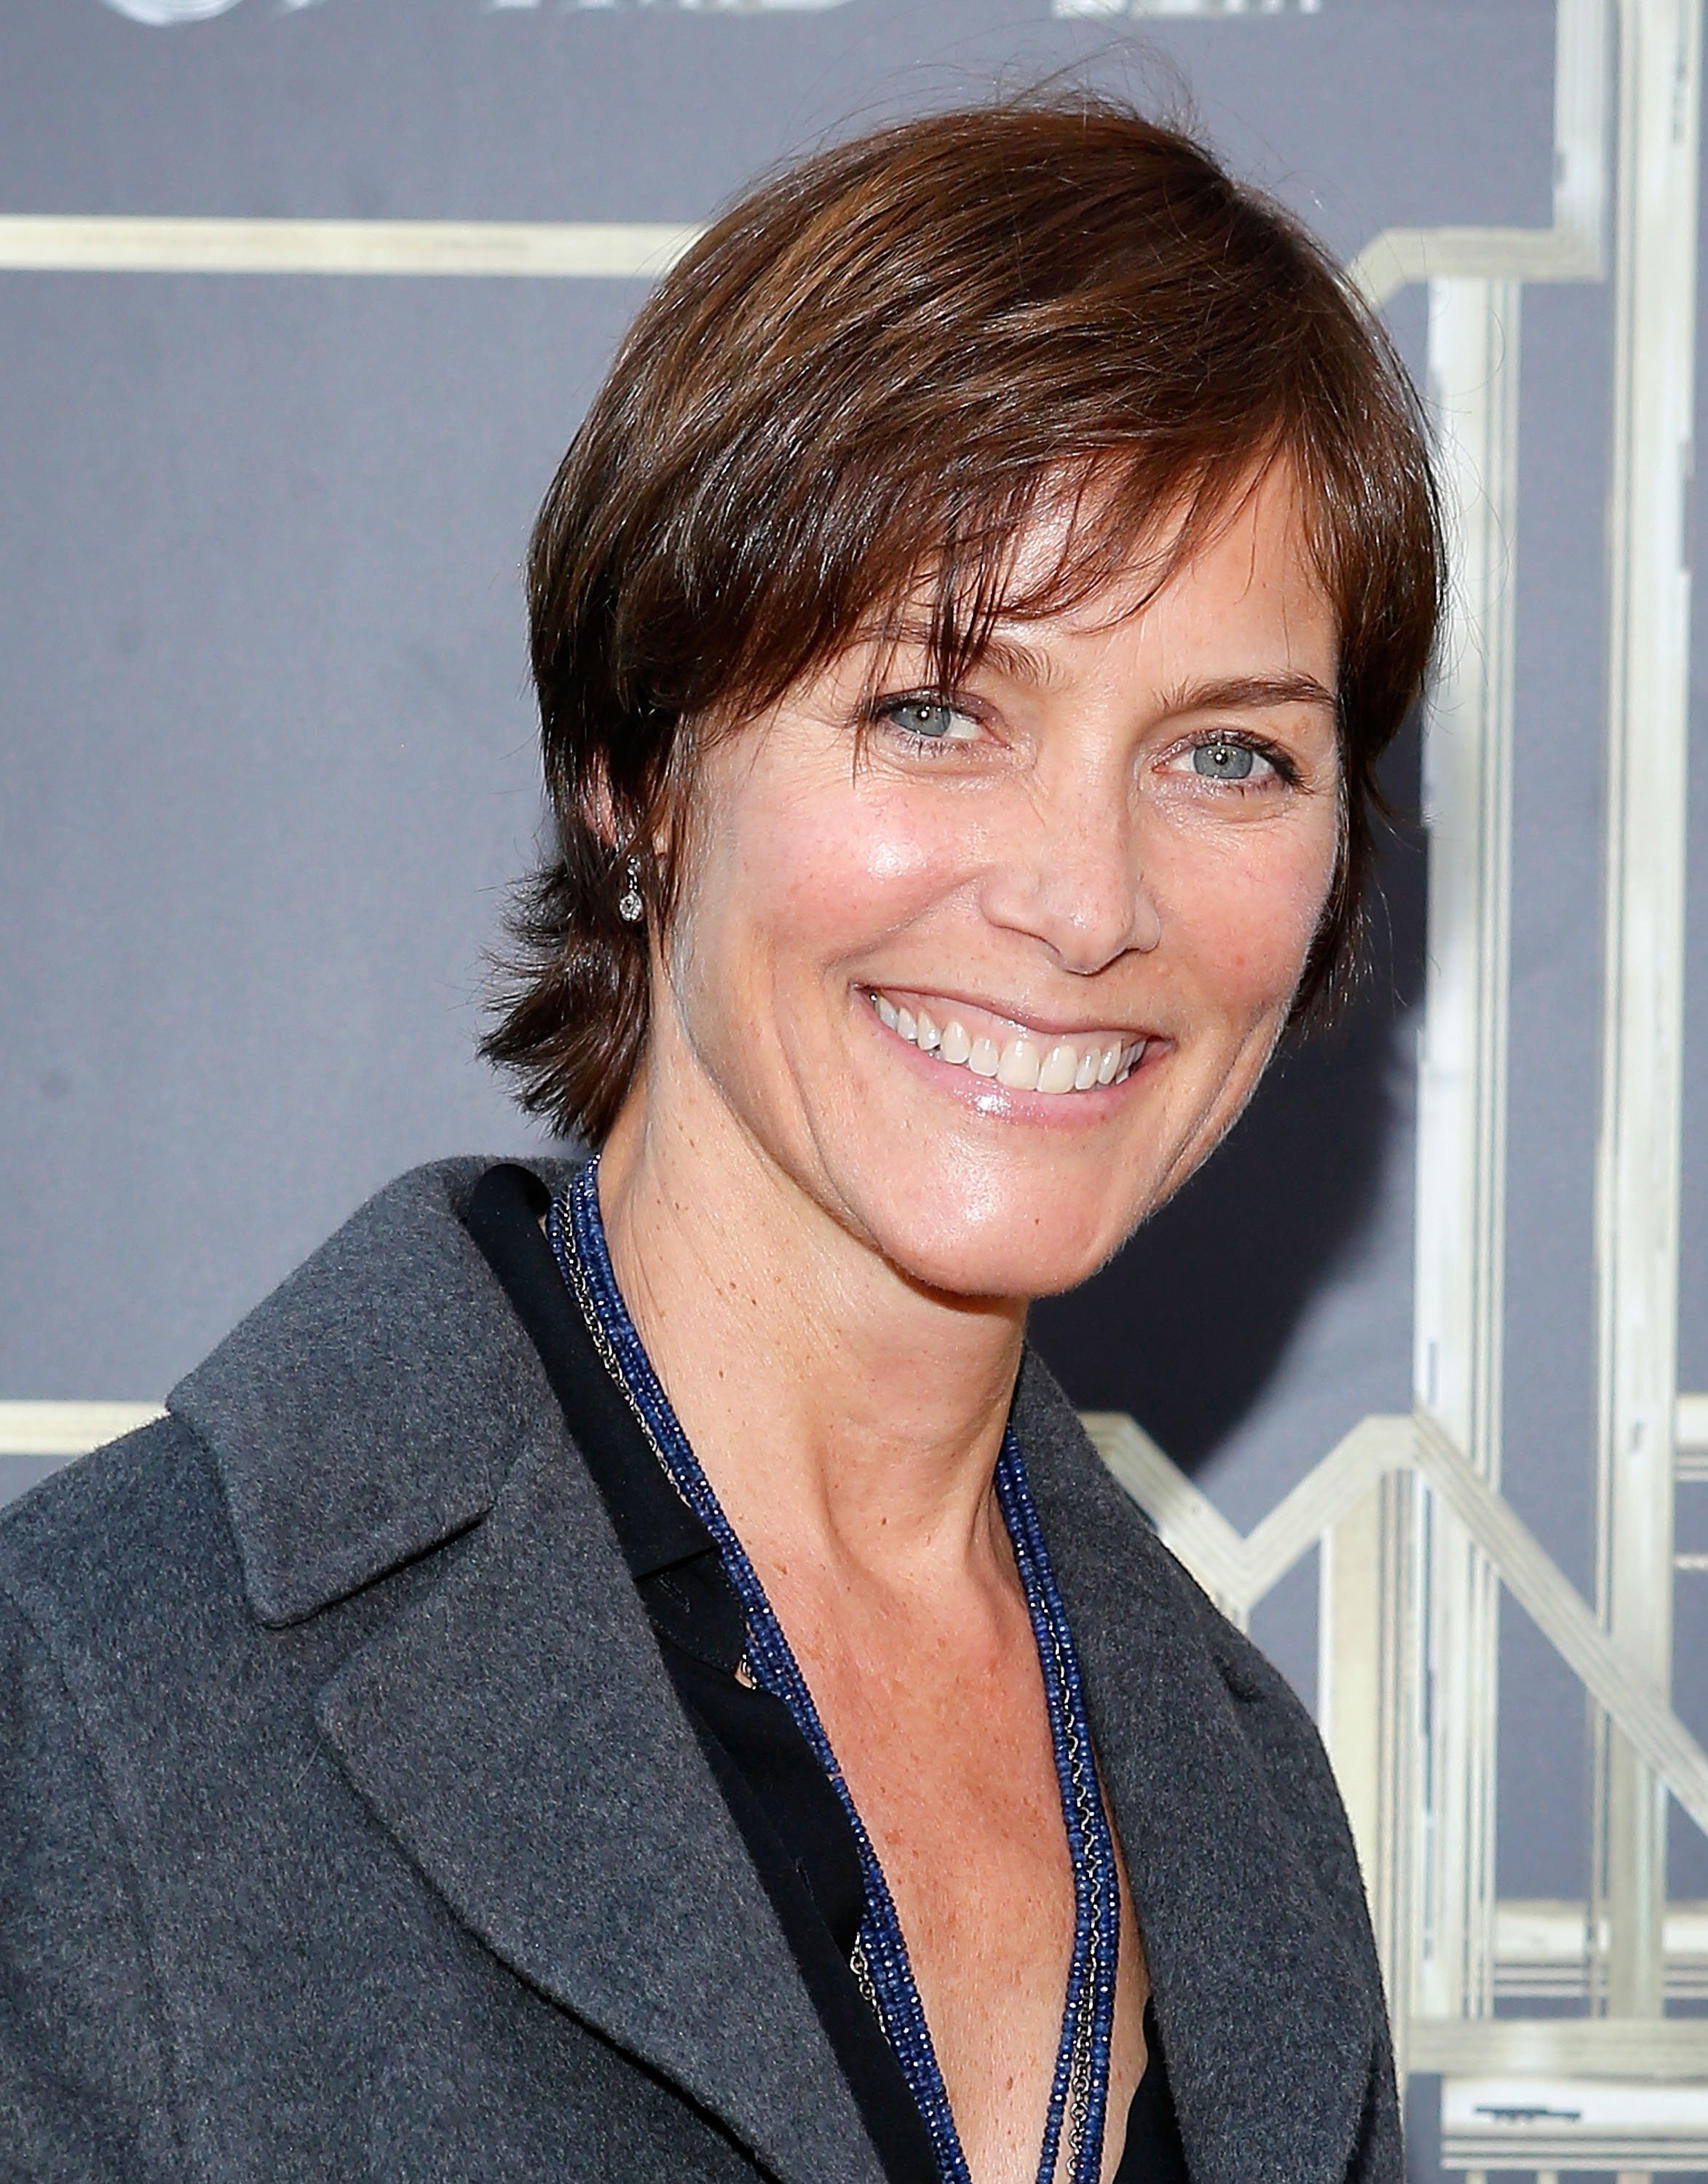 Actress Carey Lowell attends "The Great Gatsby" world premiere at Avery Fisher Hall at Lincoln Center for the Performing Arts on May 1, 2013, in New York City. | Source: Getty Images.